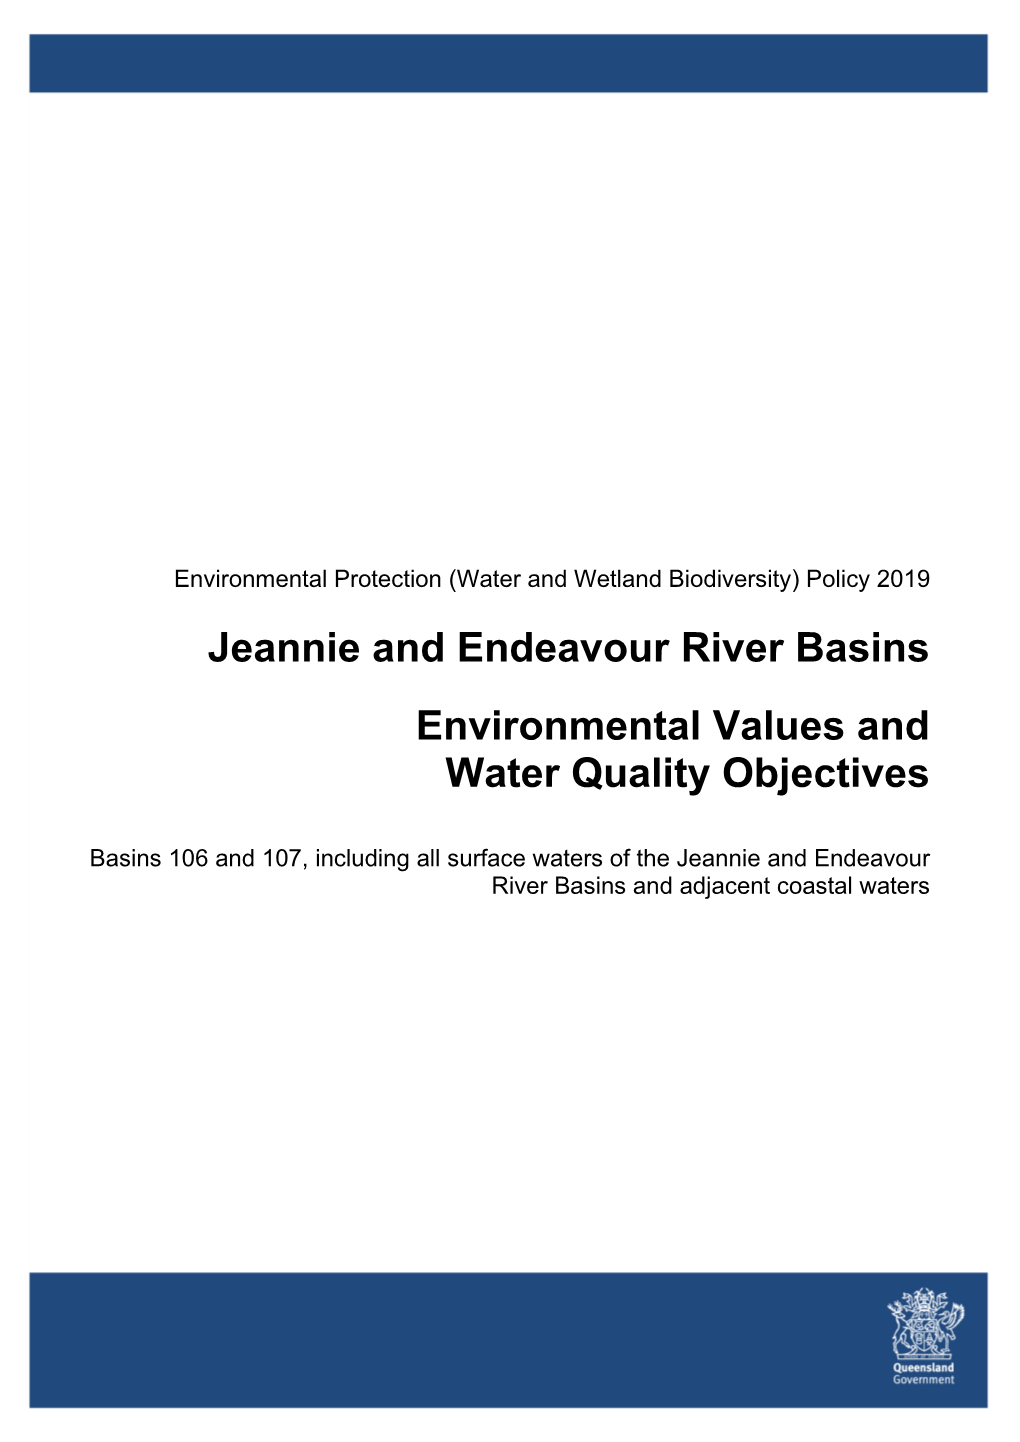 Jeannie and Endeavour River Basins Environmental Values and Water Quality Objectives